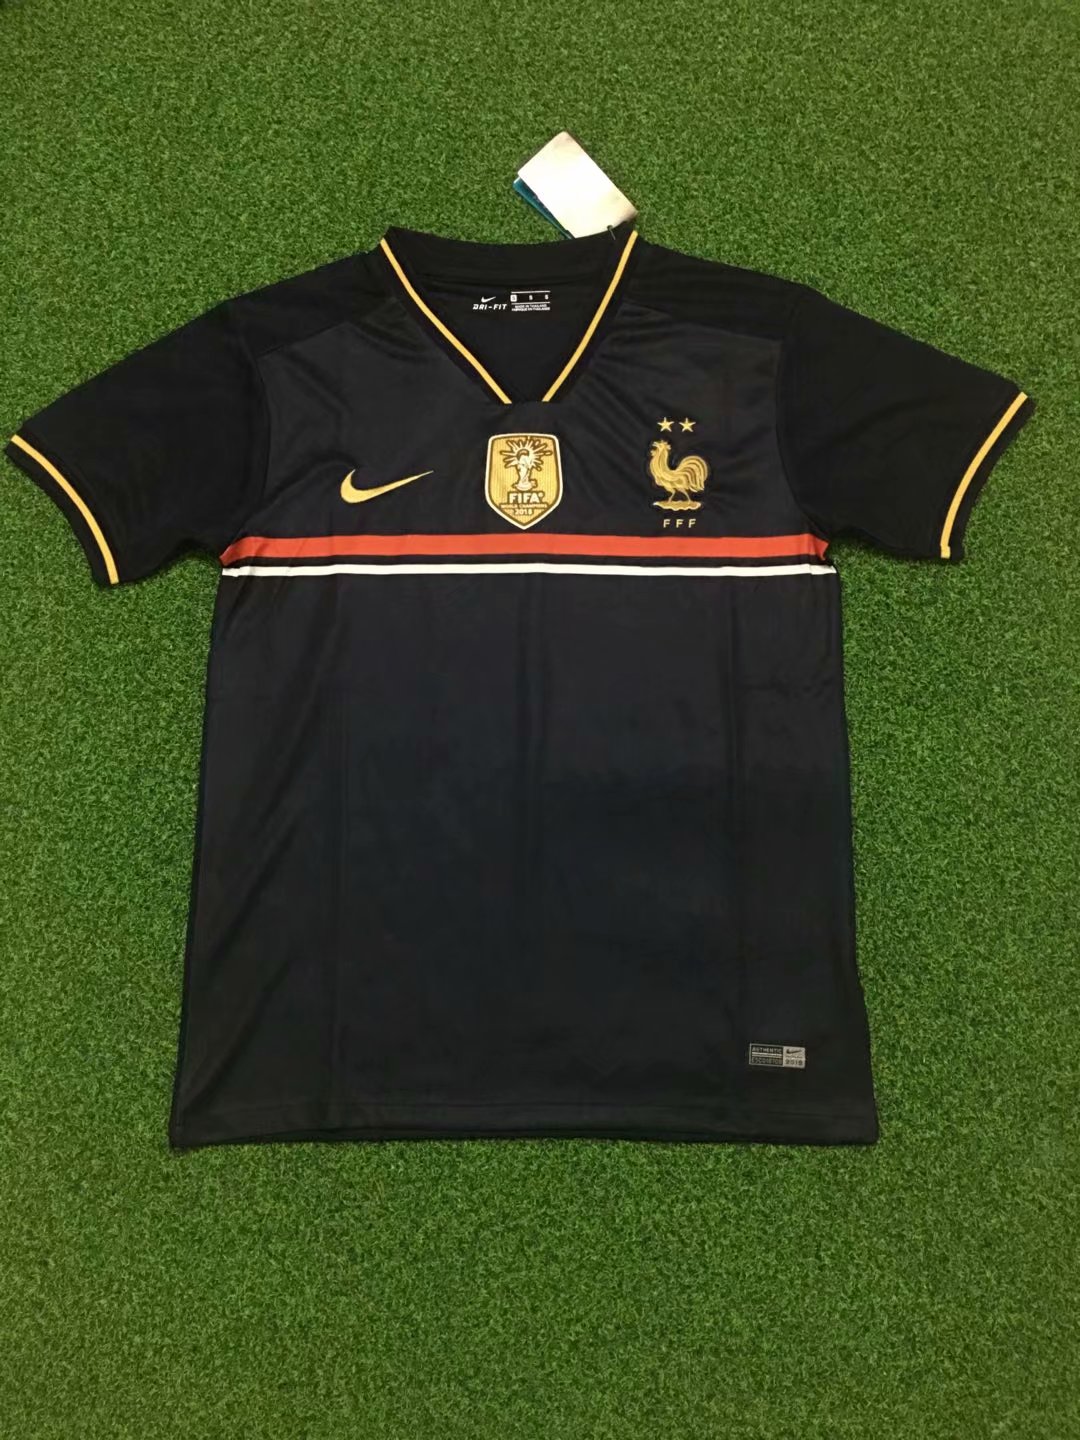 http://www.maillotfactory.com/images/Maillot%20France%2020192002.jpg